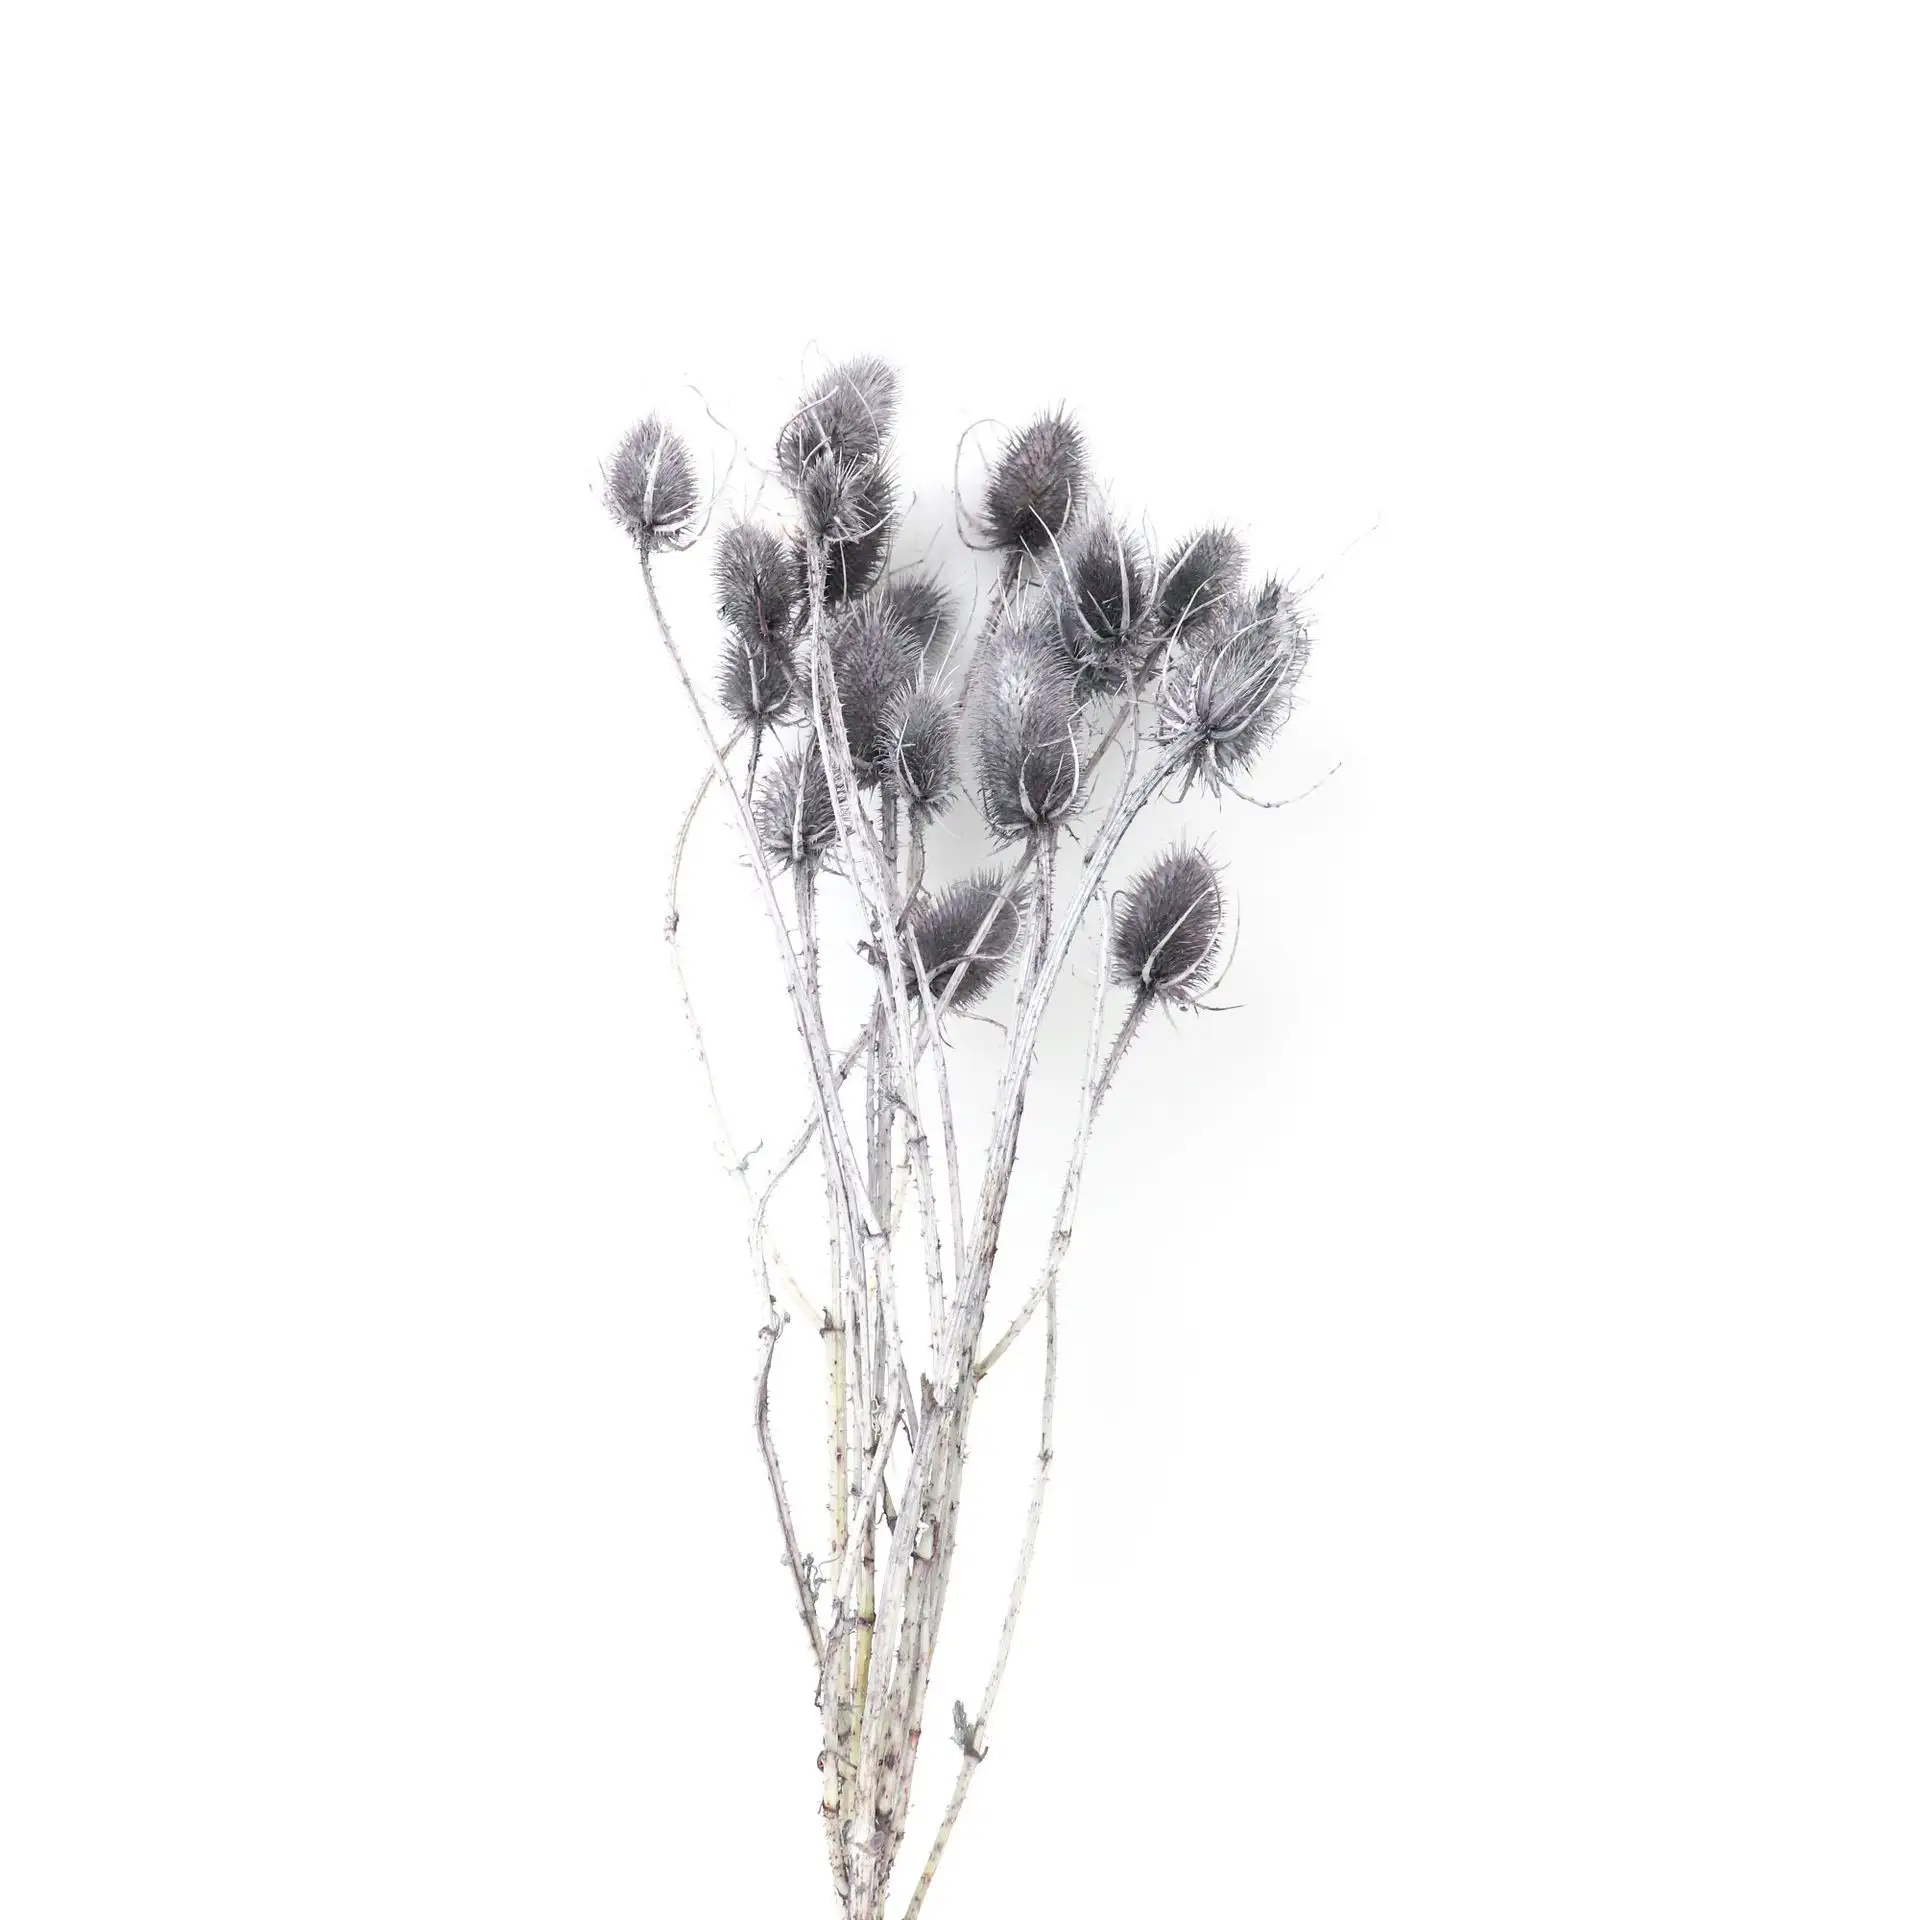 Cheap Dried Thistle Stalks Diy Boho Decoration Natural Wild Dried Flowers Native Teasel Thistle Stalks Dipsacus